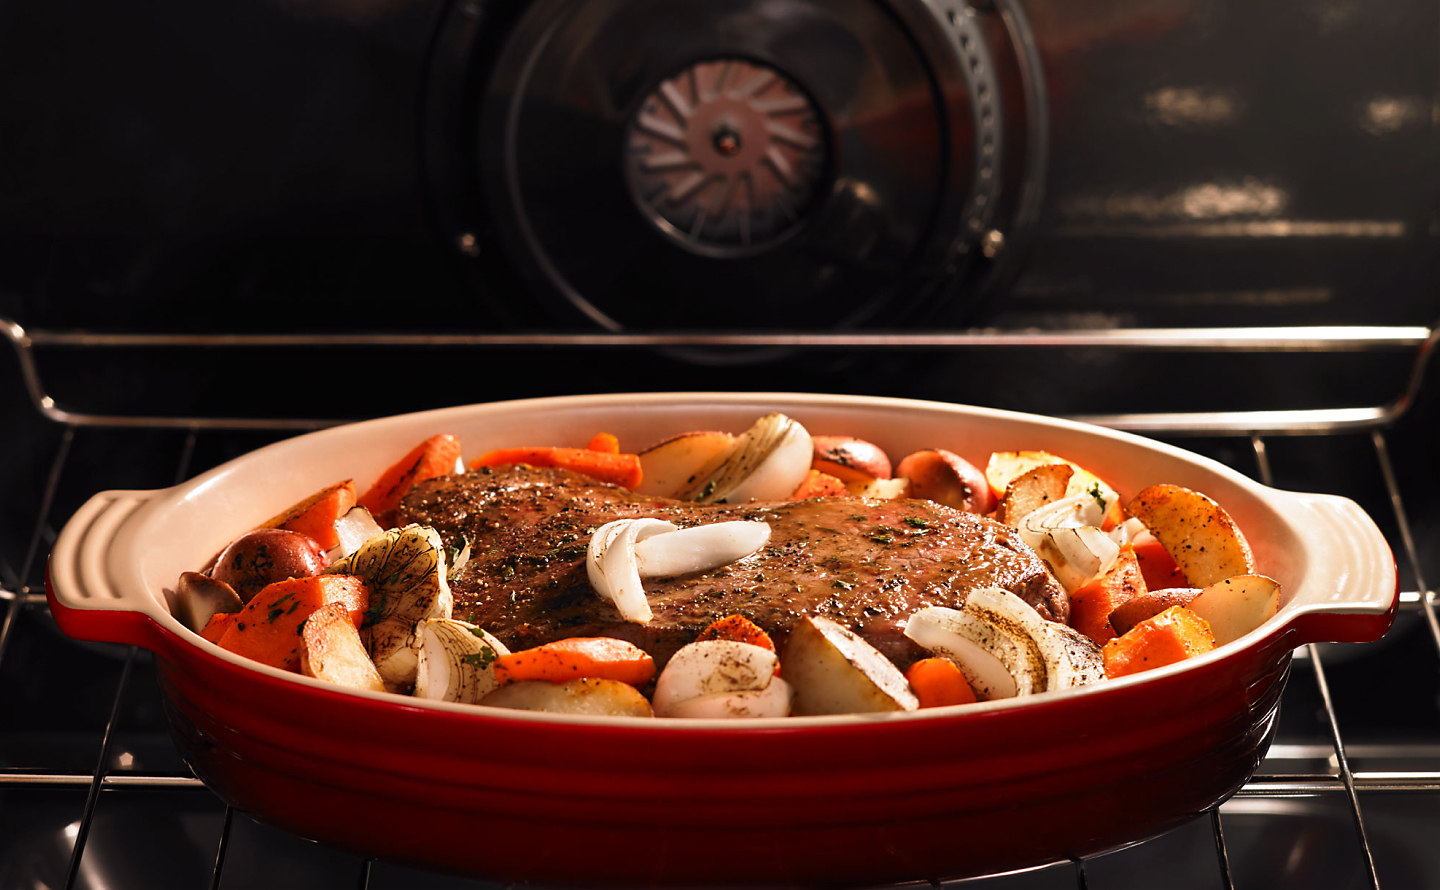 Meat with roasted vegetables cooking in a red baking dish